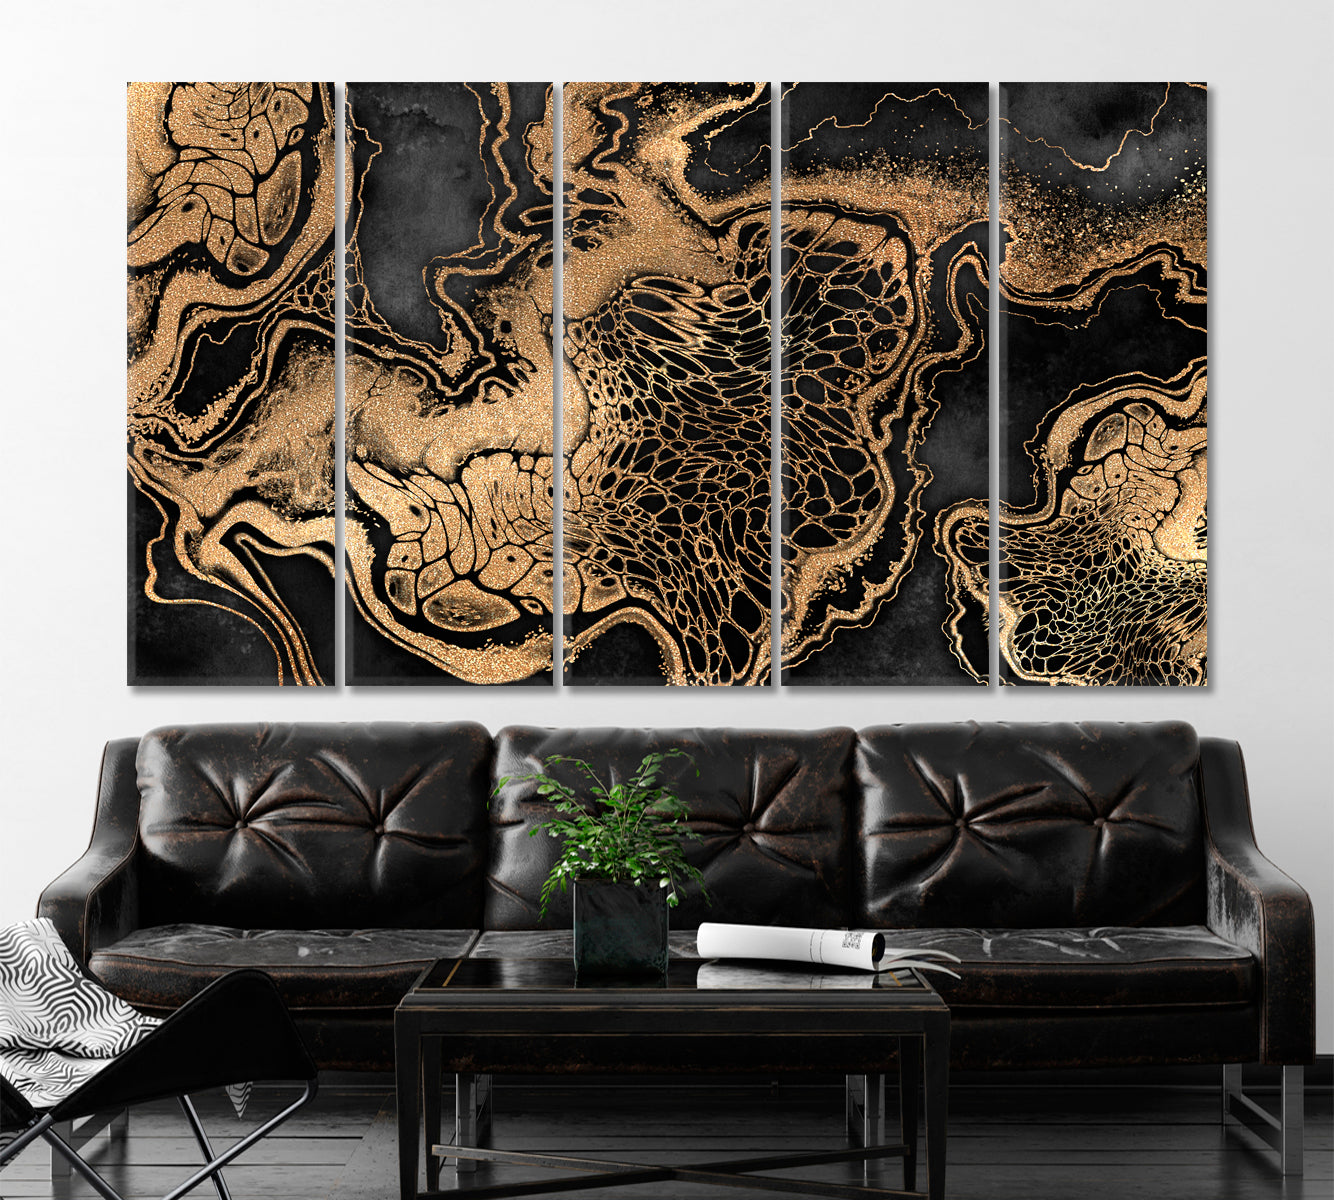 Luxury Black And Gold Abstract Marble With Veins Giclée Print Fluid Art, Oriental Marbling Canvas Print Artesty 5 panels 36" x 24" 